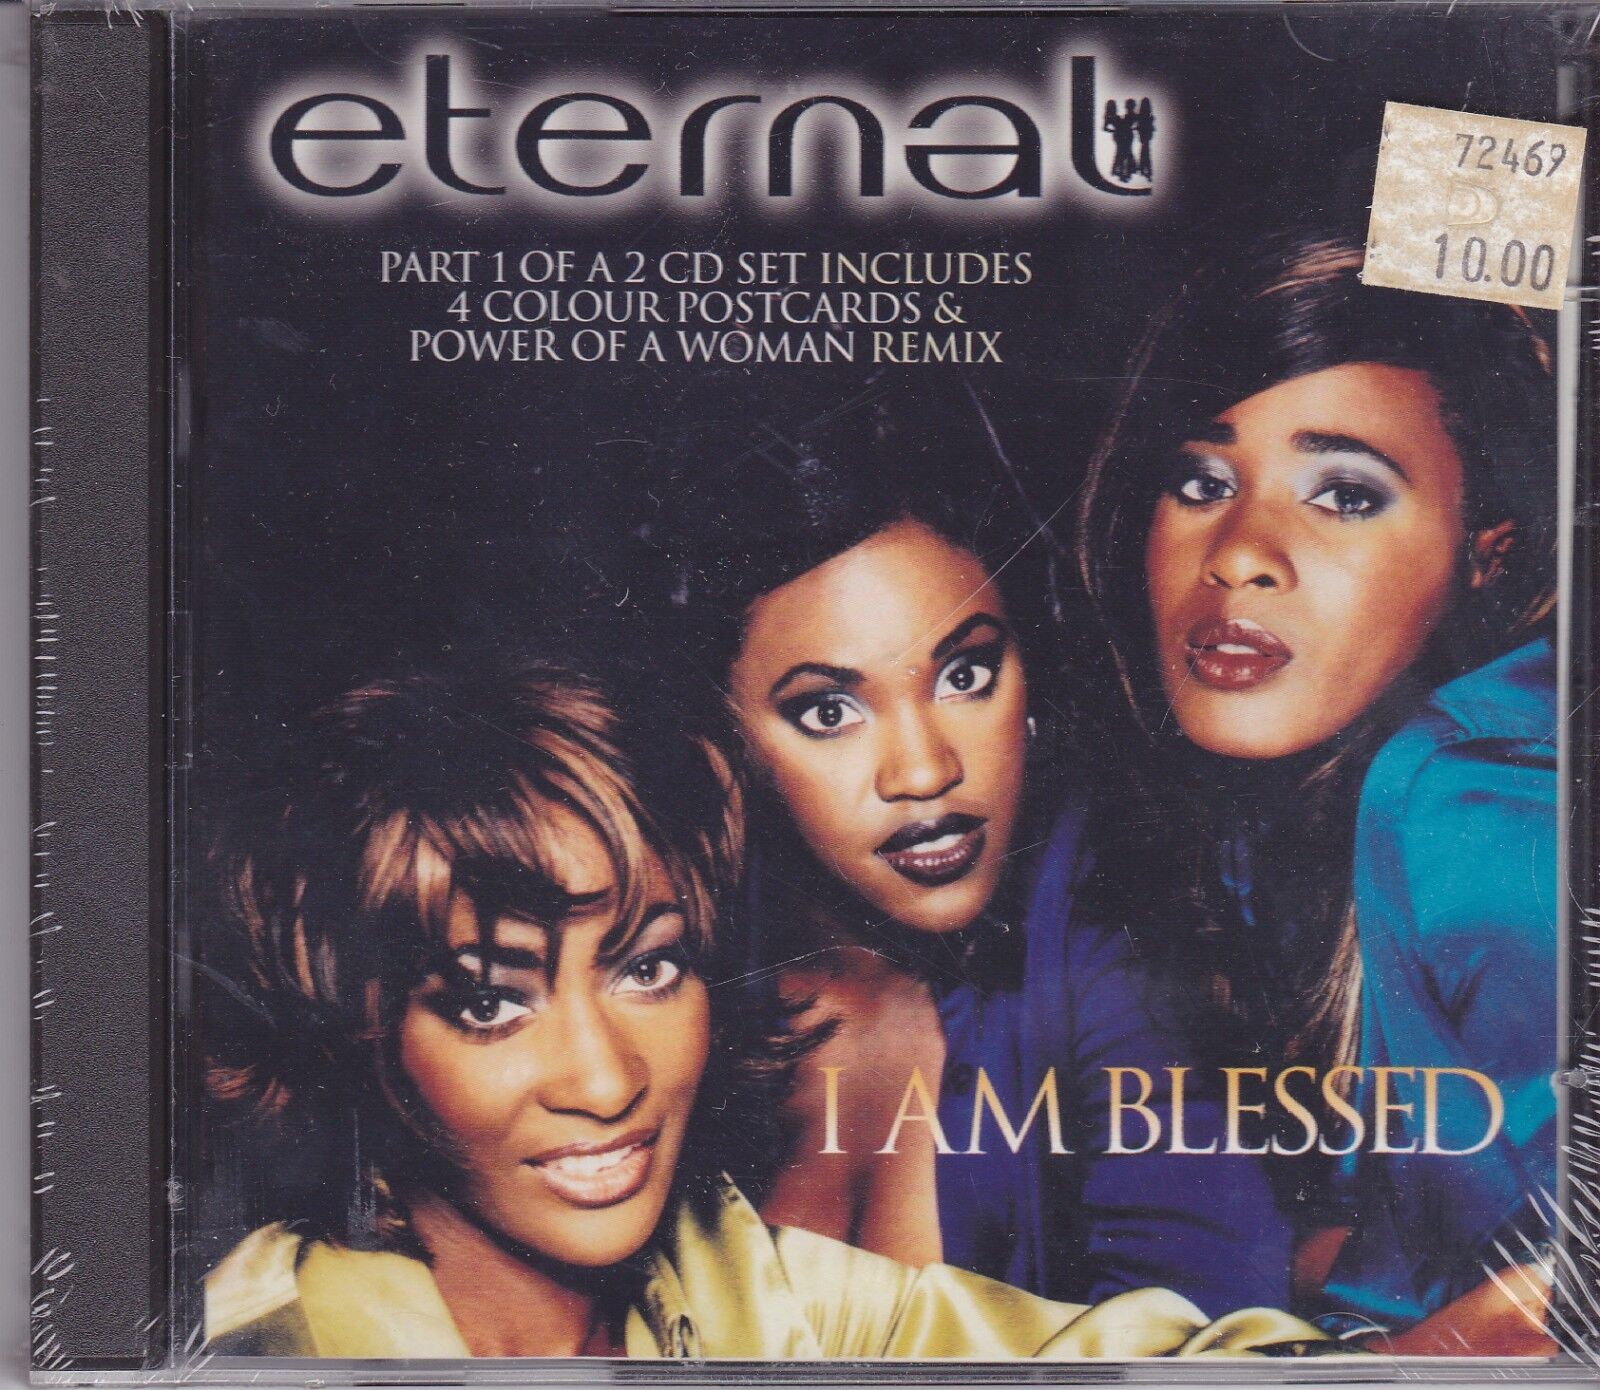 Eternal-I Am Blessed cd maxi single sealed